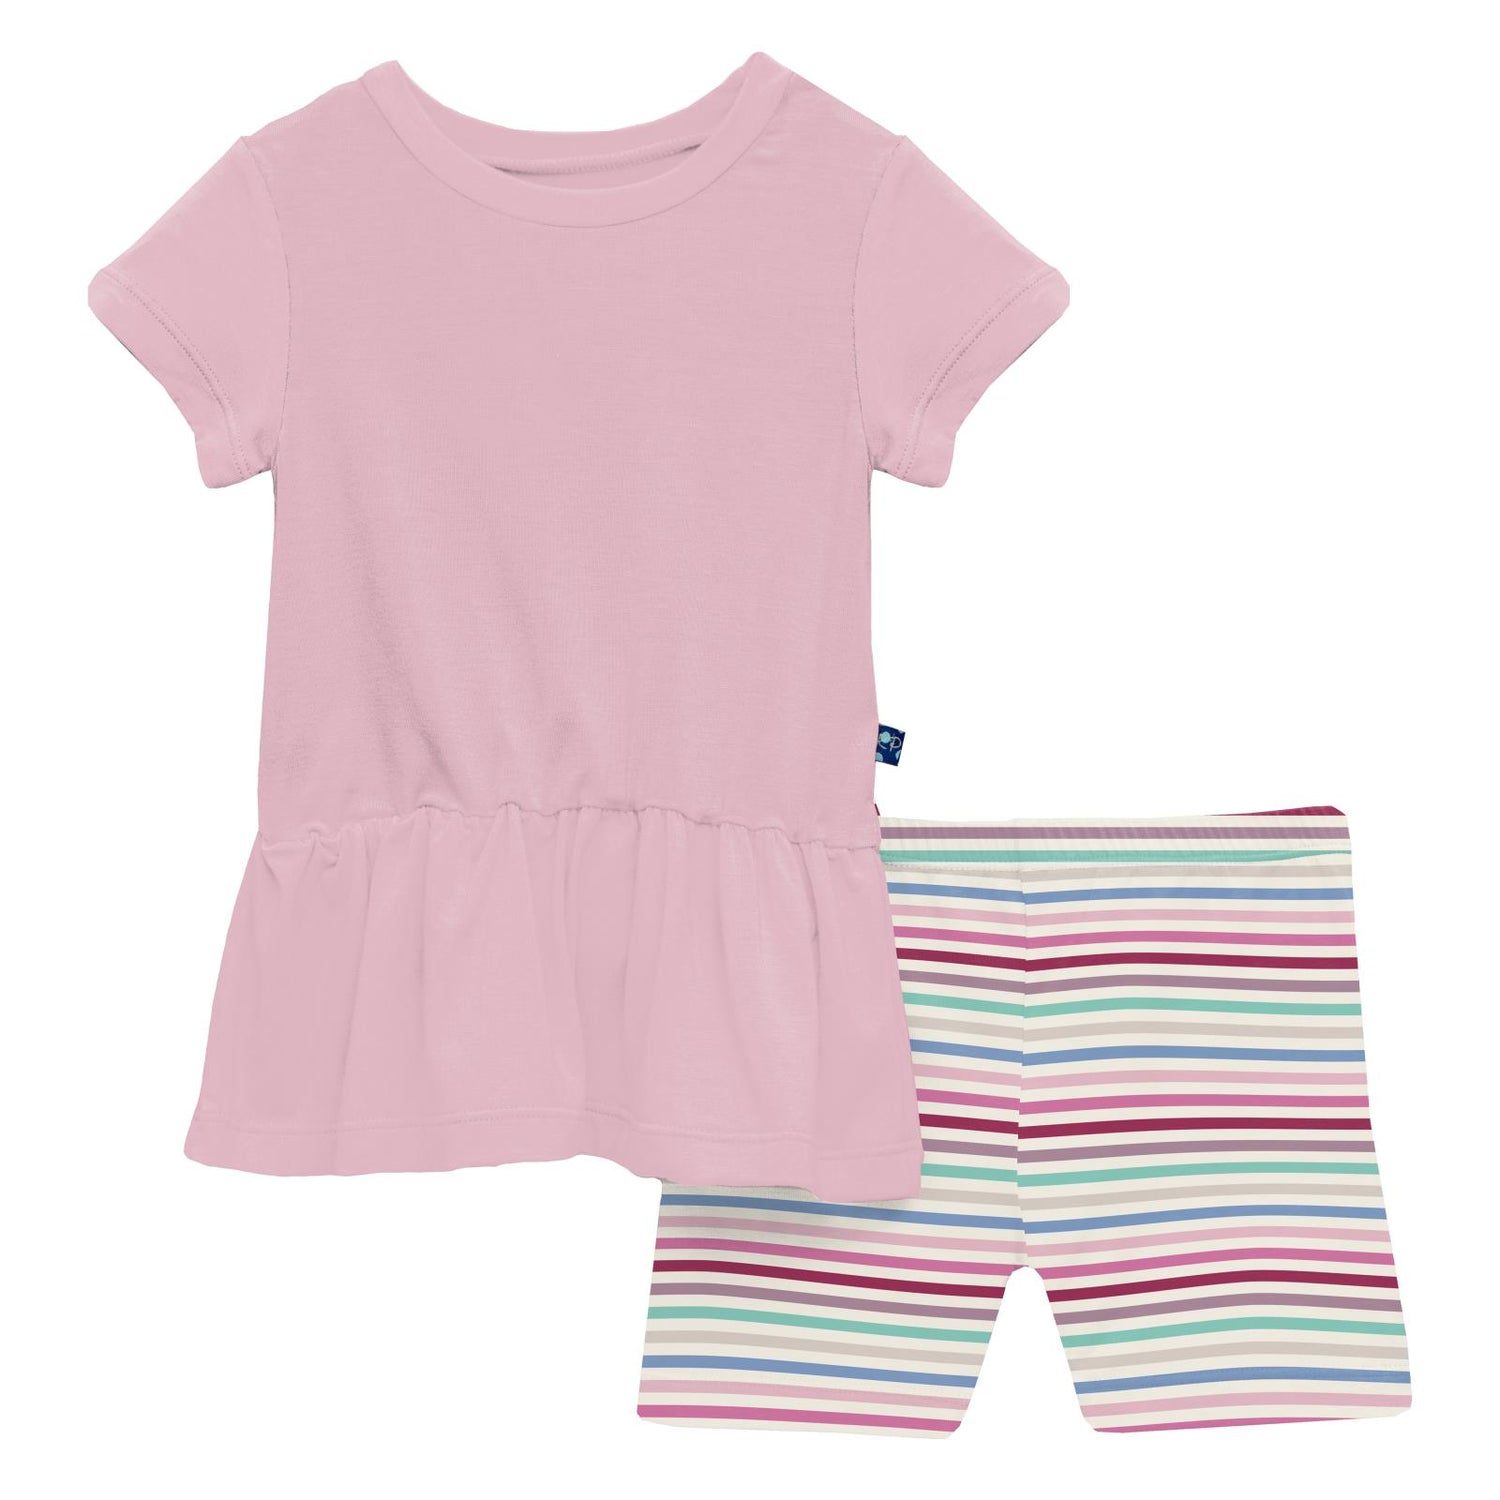 Print Short Sleeve Playtime Outfit Set in Make Believe Stripe